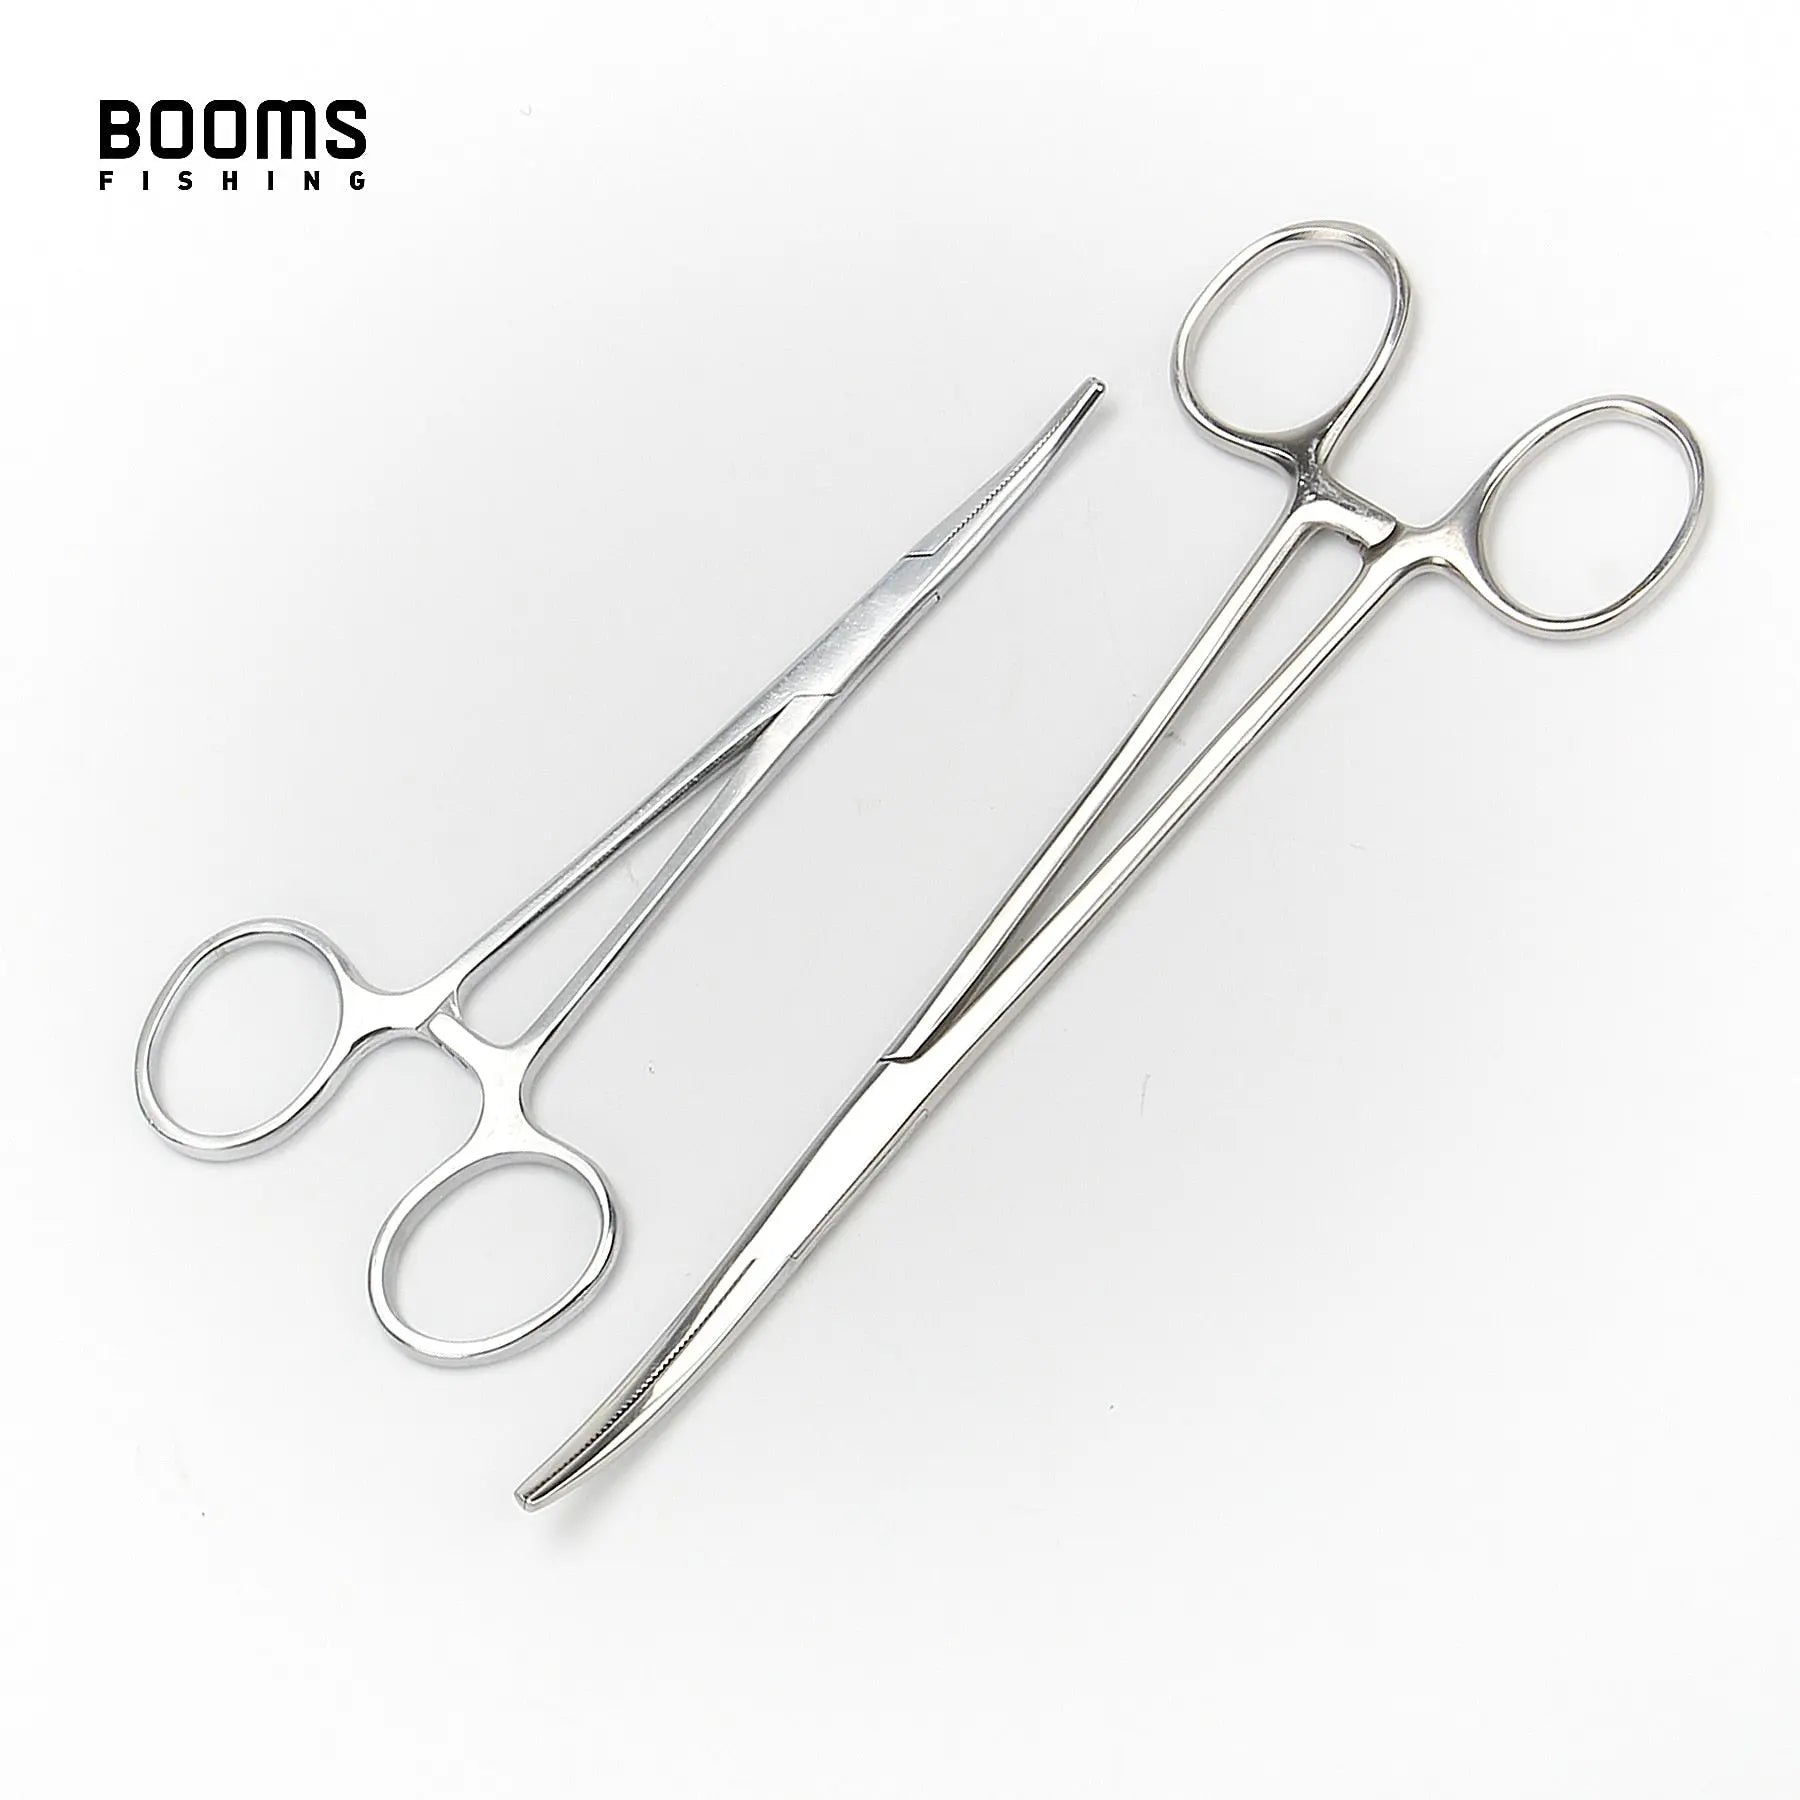 Stainless Steel Forceps Fish Hook Remover Curved Tip Clamps